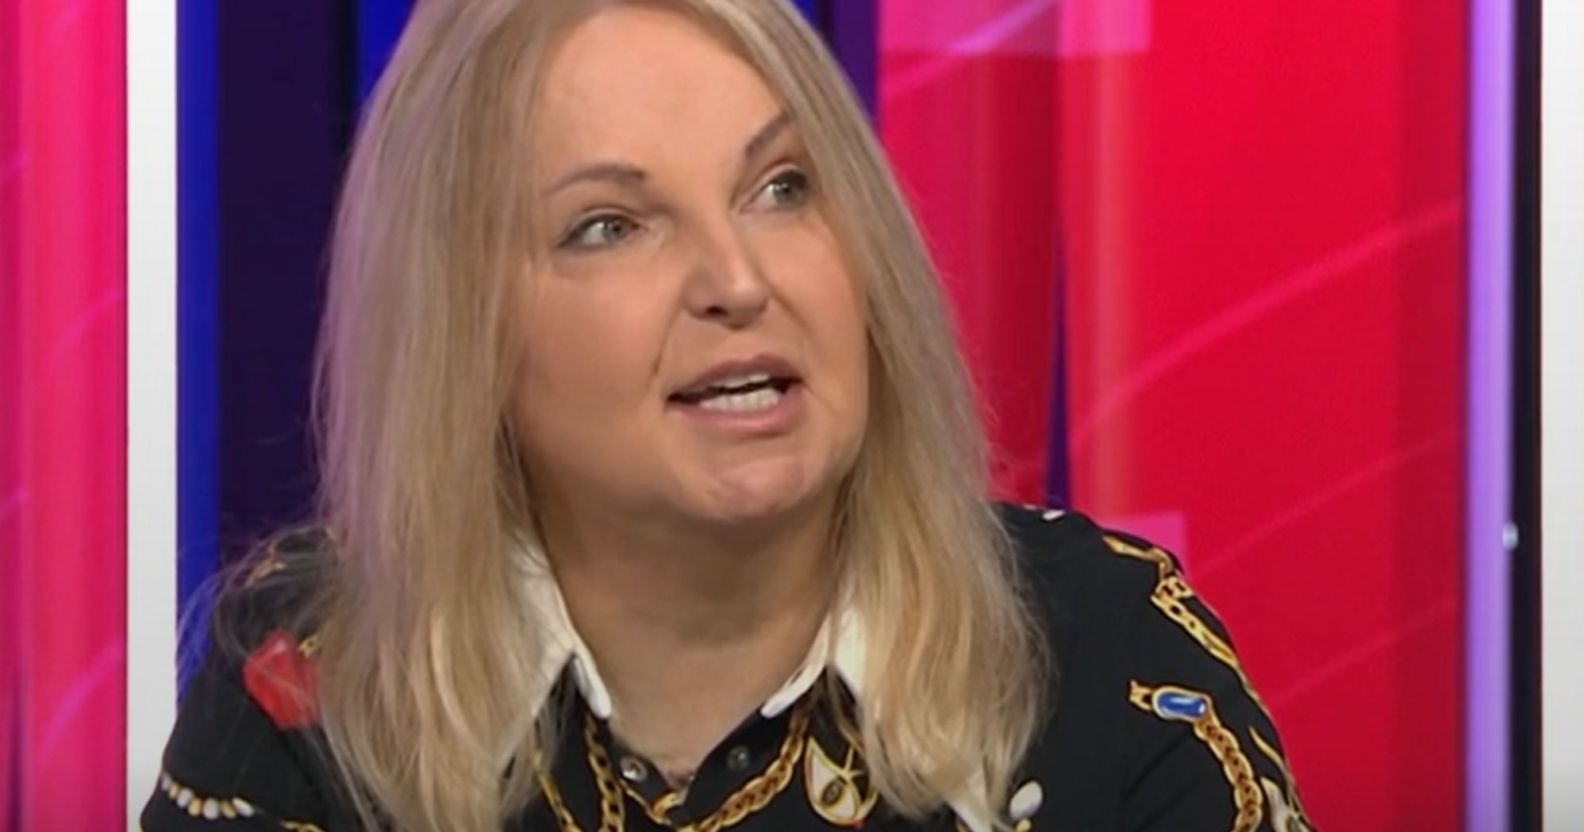 India Willoughby during a segment on Question Time.